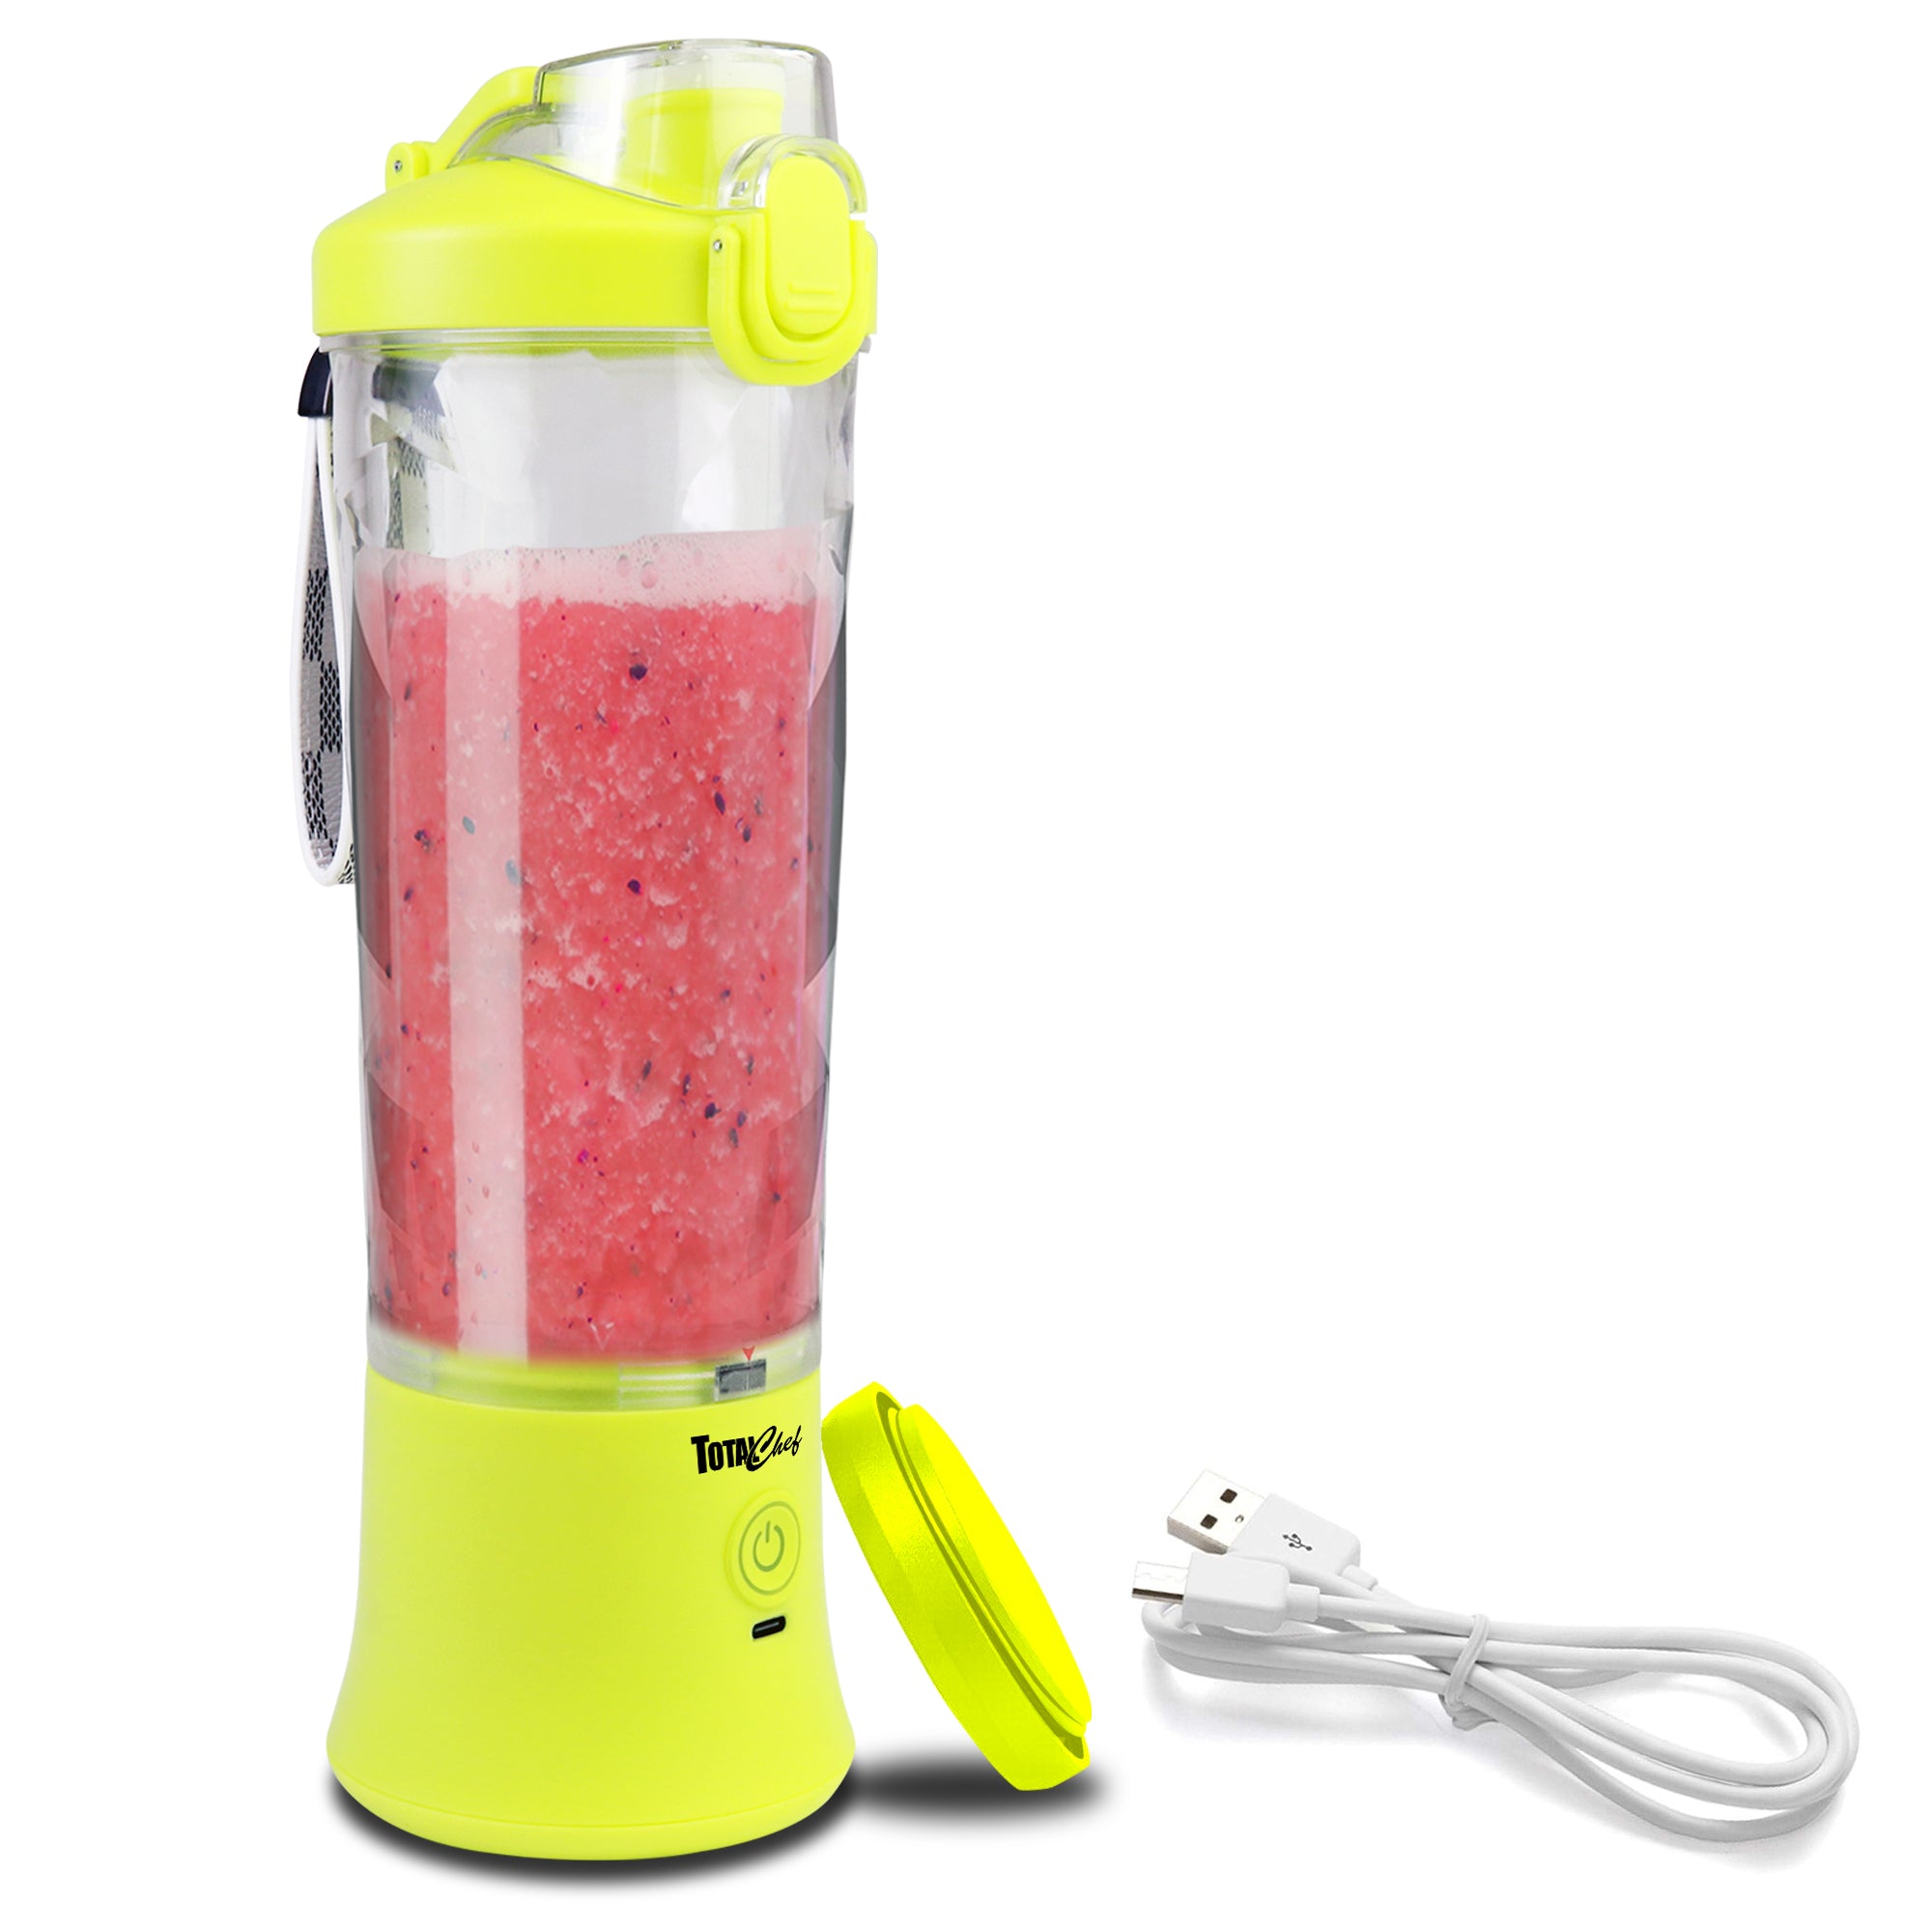 Product shot of Total Chef personal cordless blender filled with bright red smoothie with travel base cover and USB power cord beside it on a white background